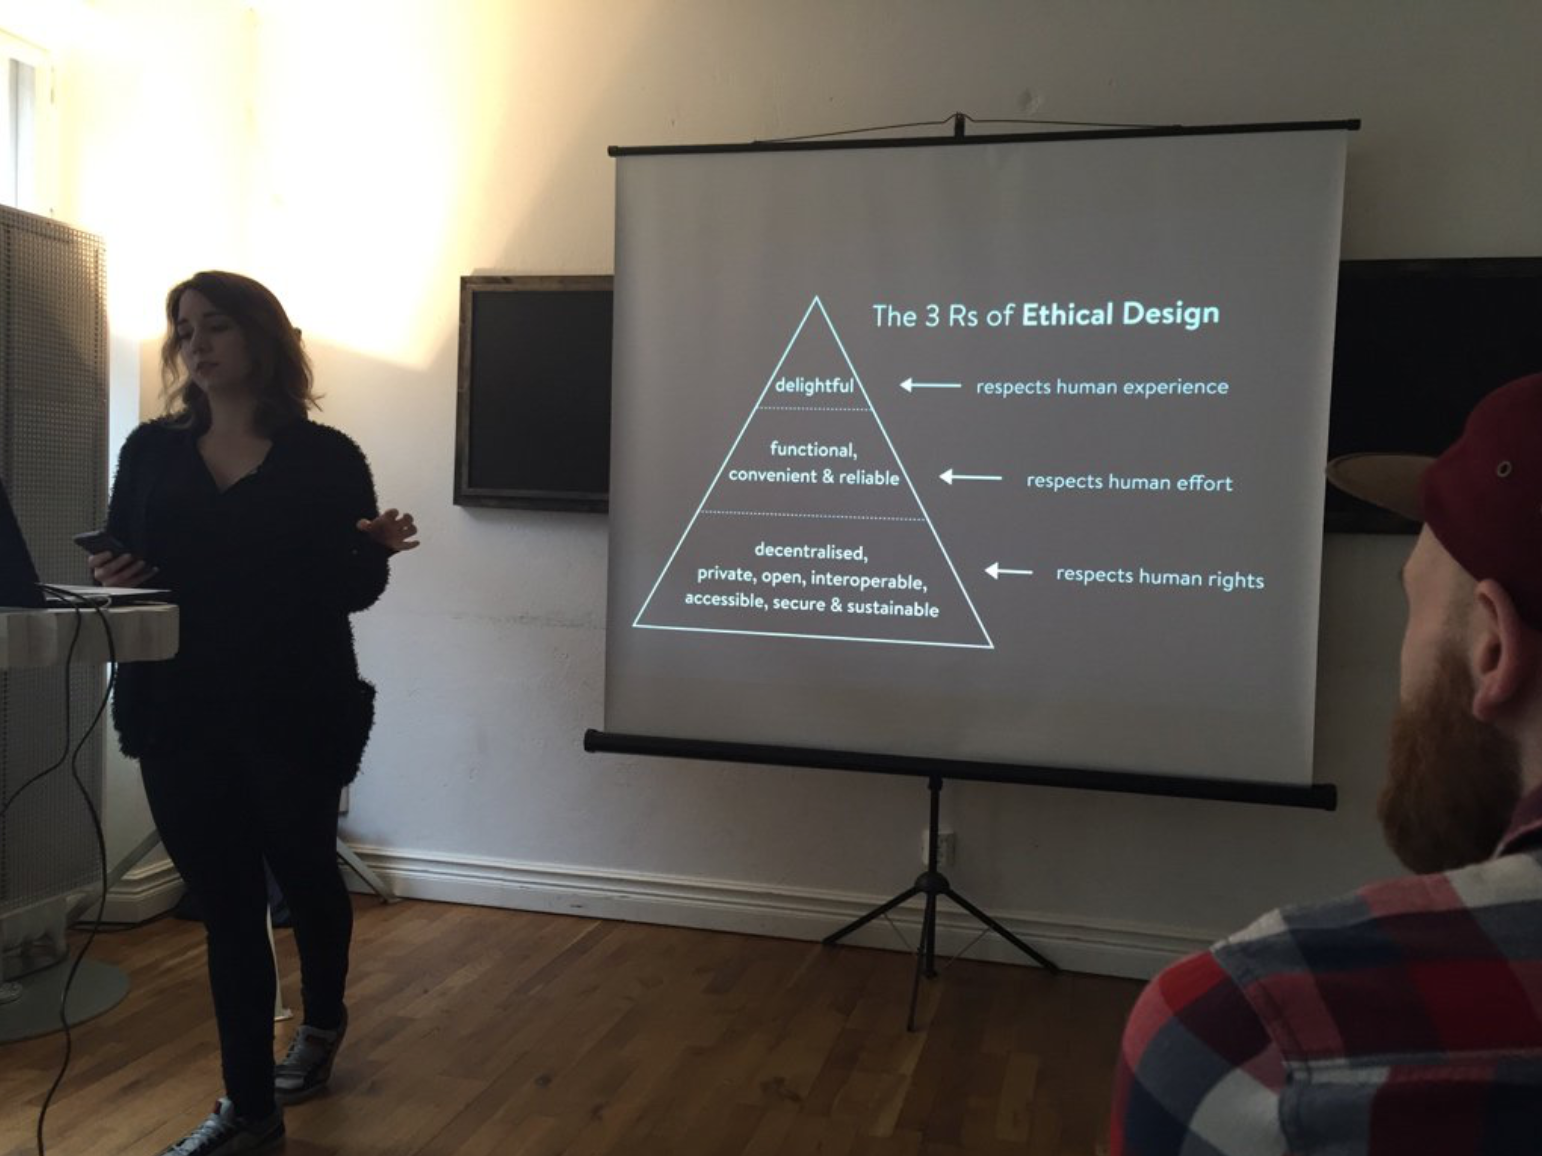 Me talking with a slide of the Ethical Design Manifesto (The 3 Rs of Ethical Design) in a fluffy black cardigan